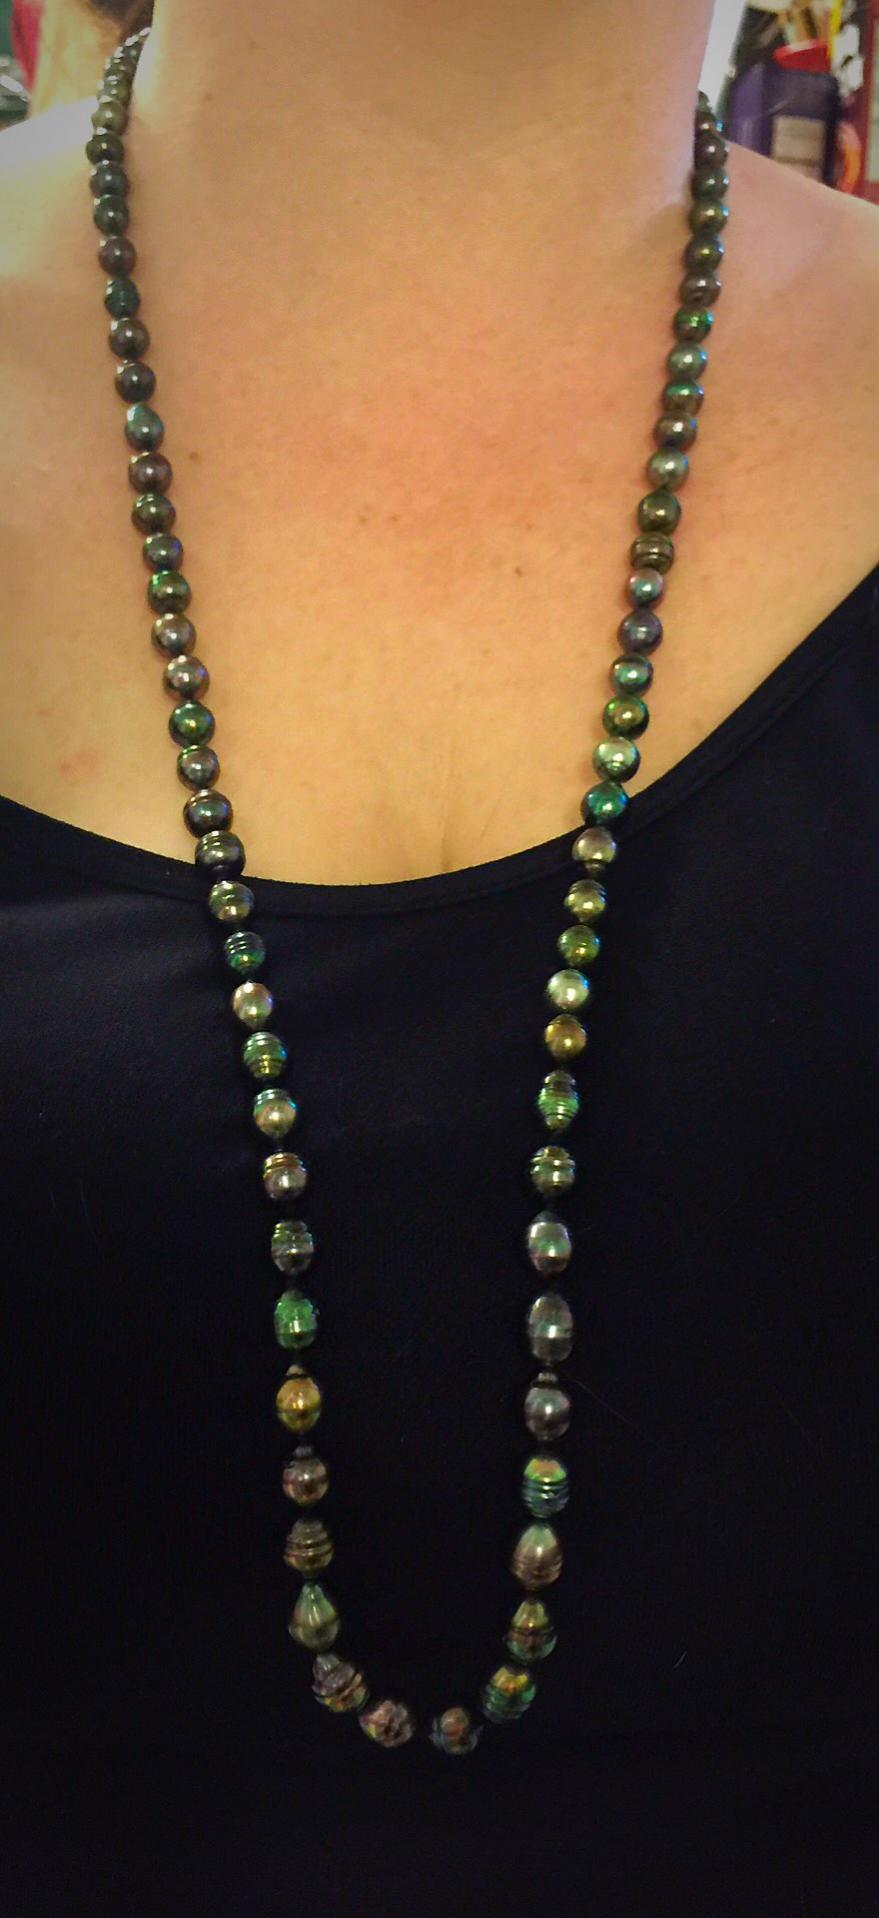 petite baroque Tahitian necklace - pearls between 7mm and 8 mm